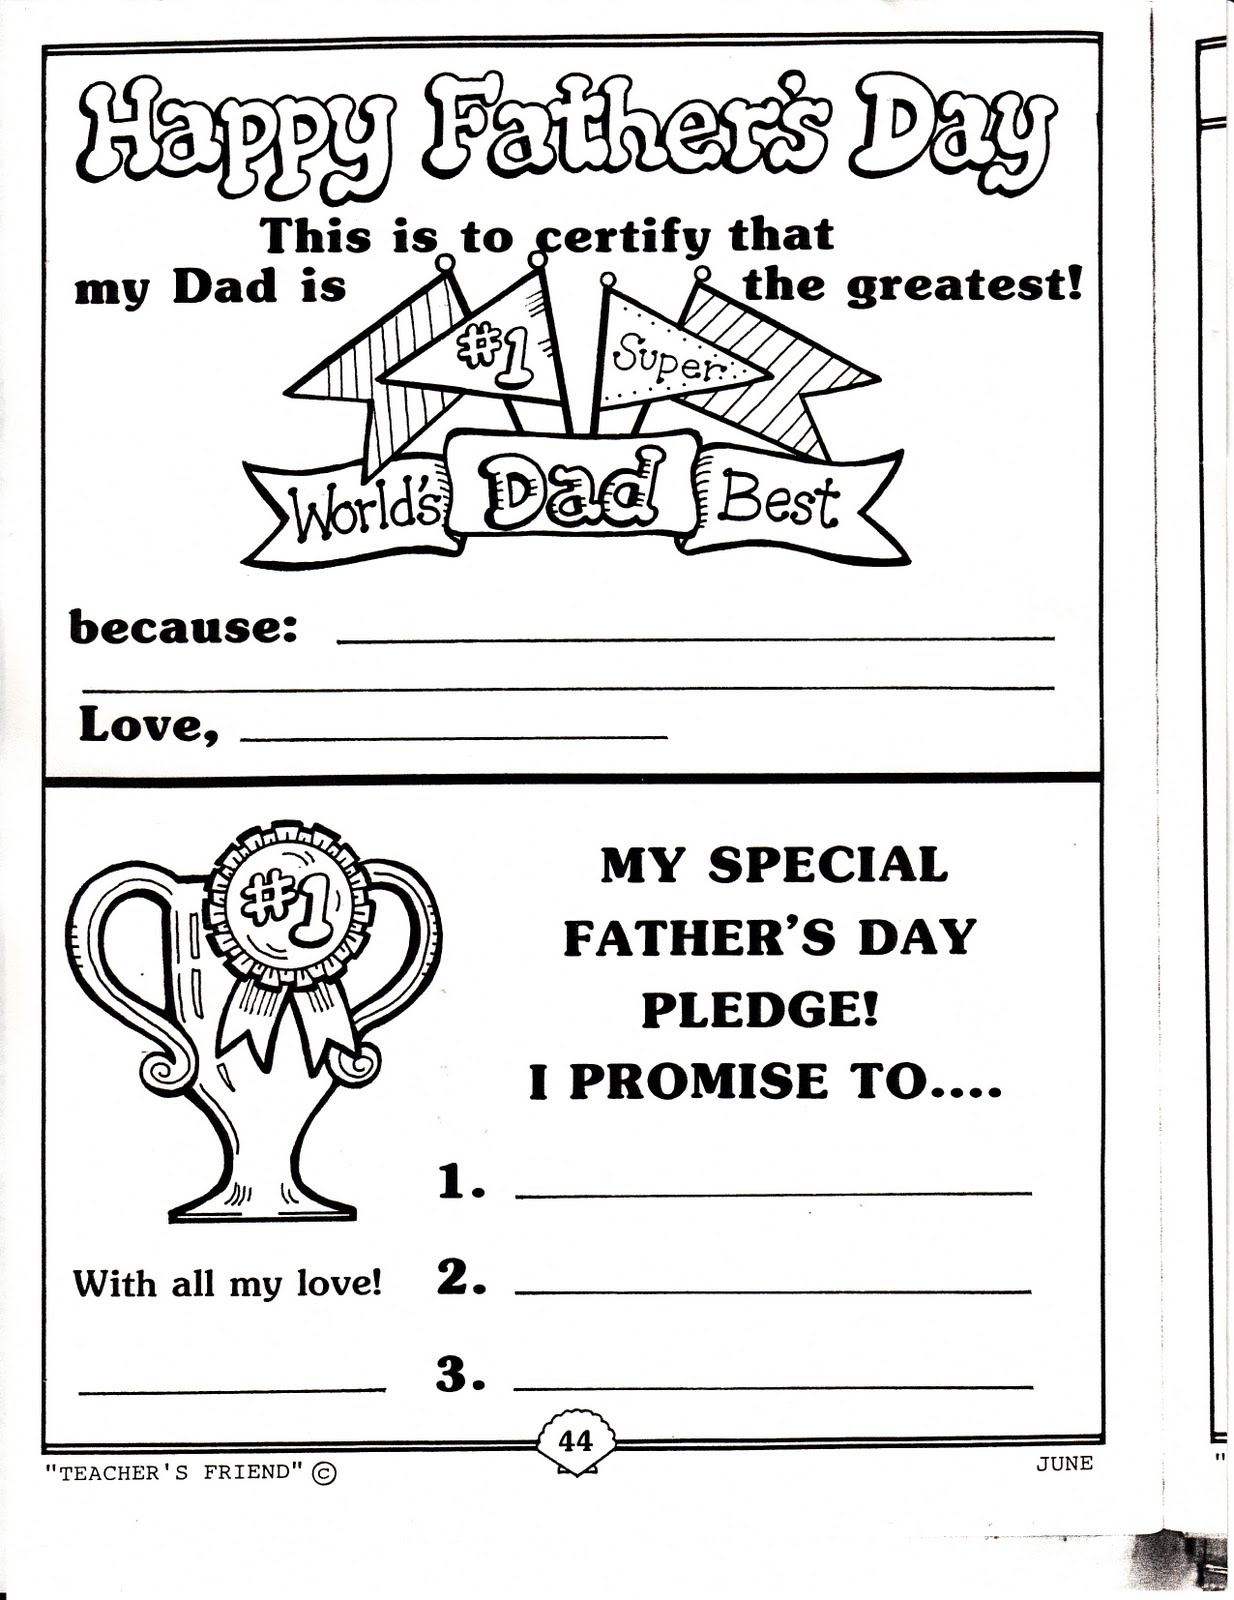 Father's Day Activities and Printables : Let's Celebrate!